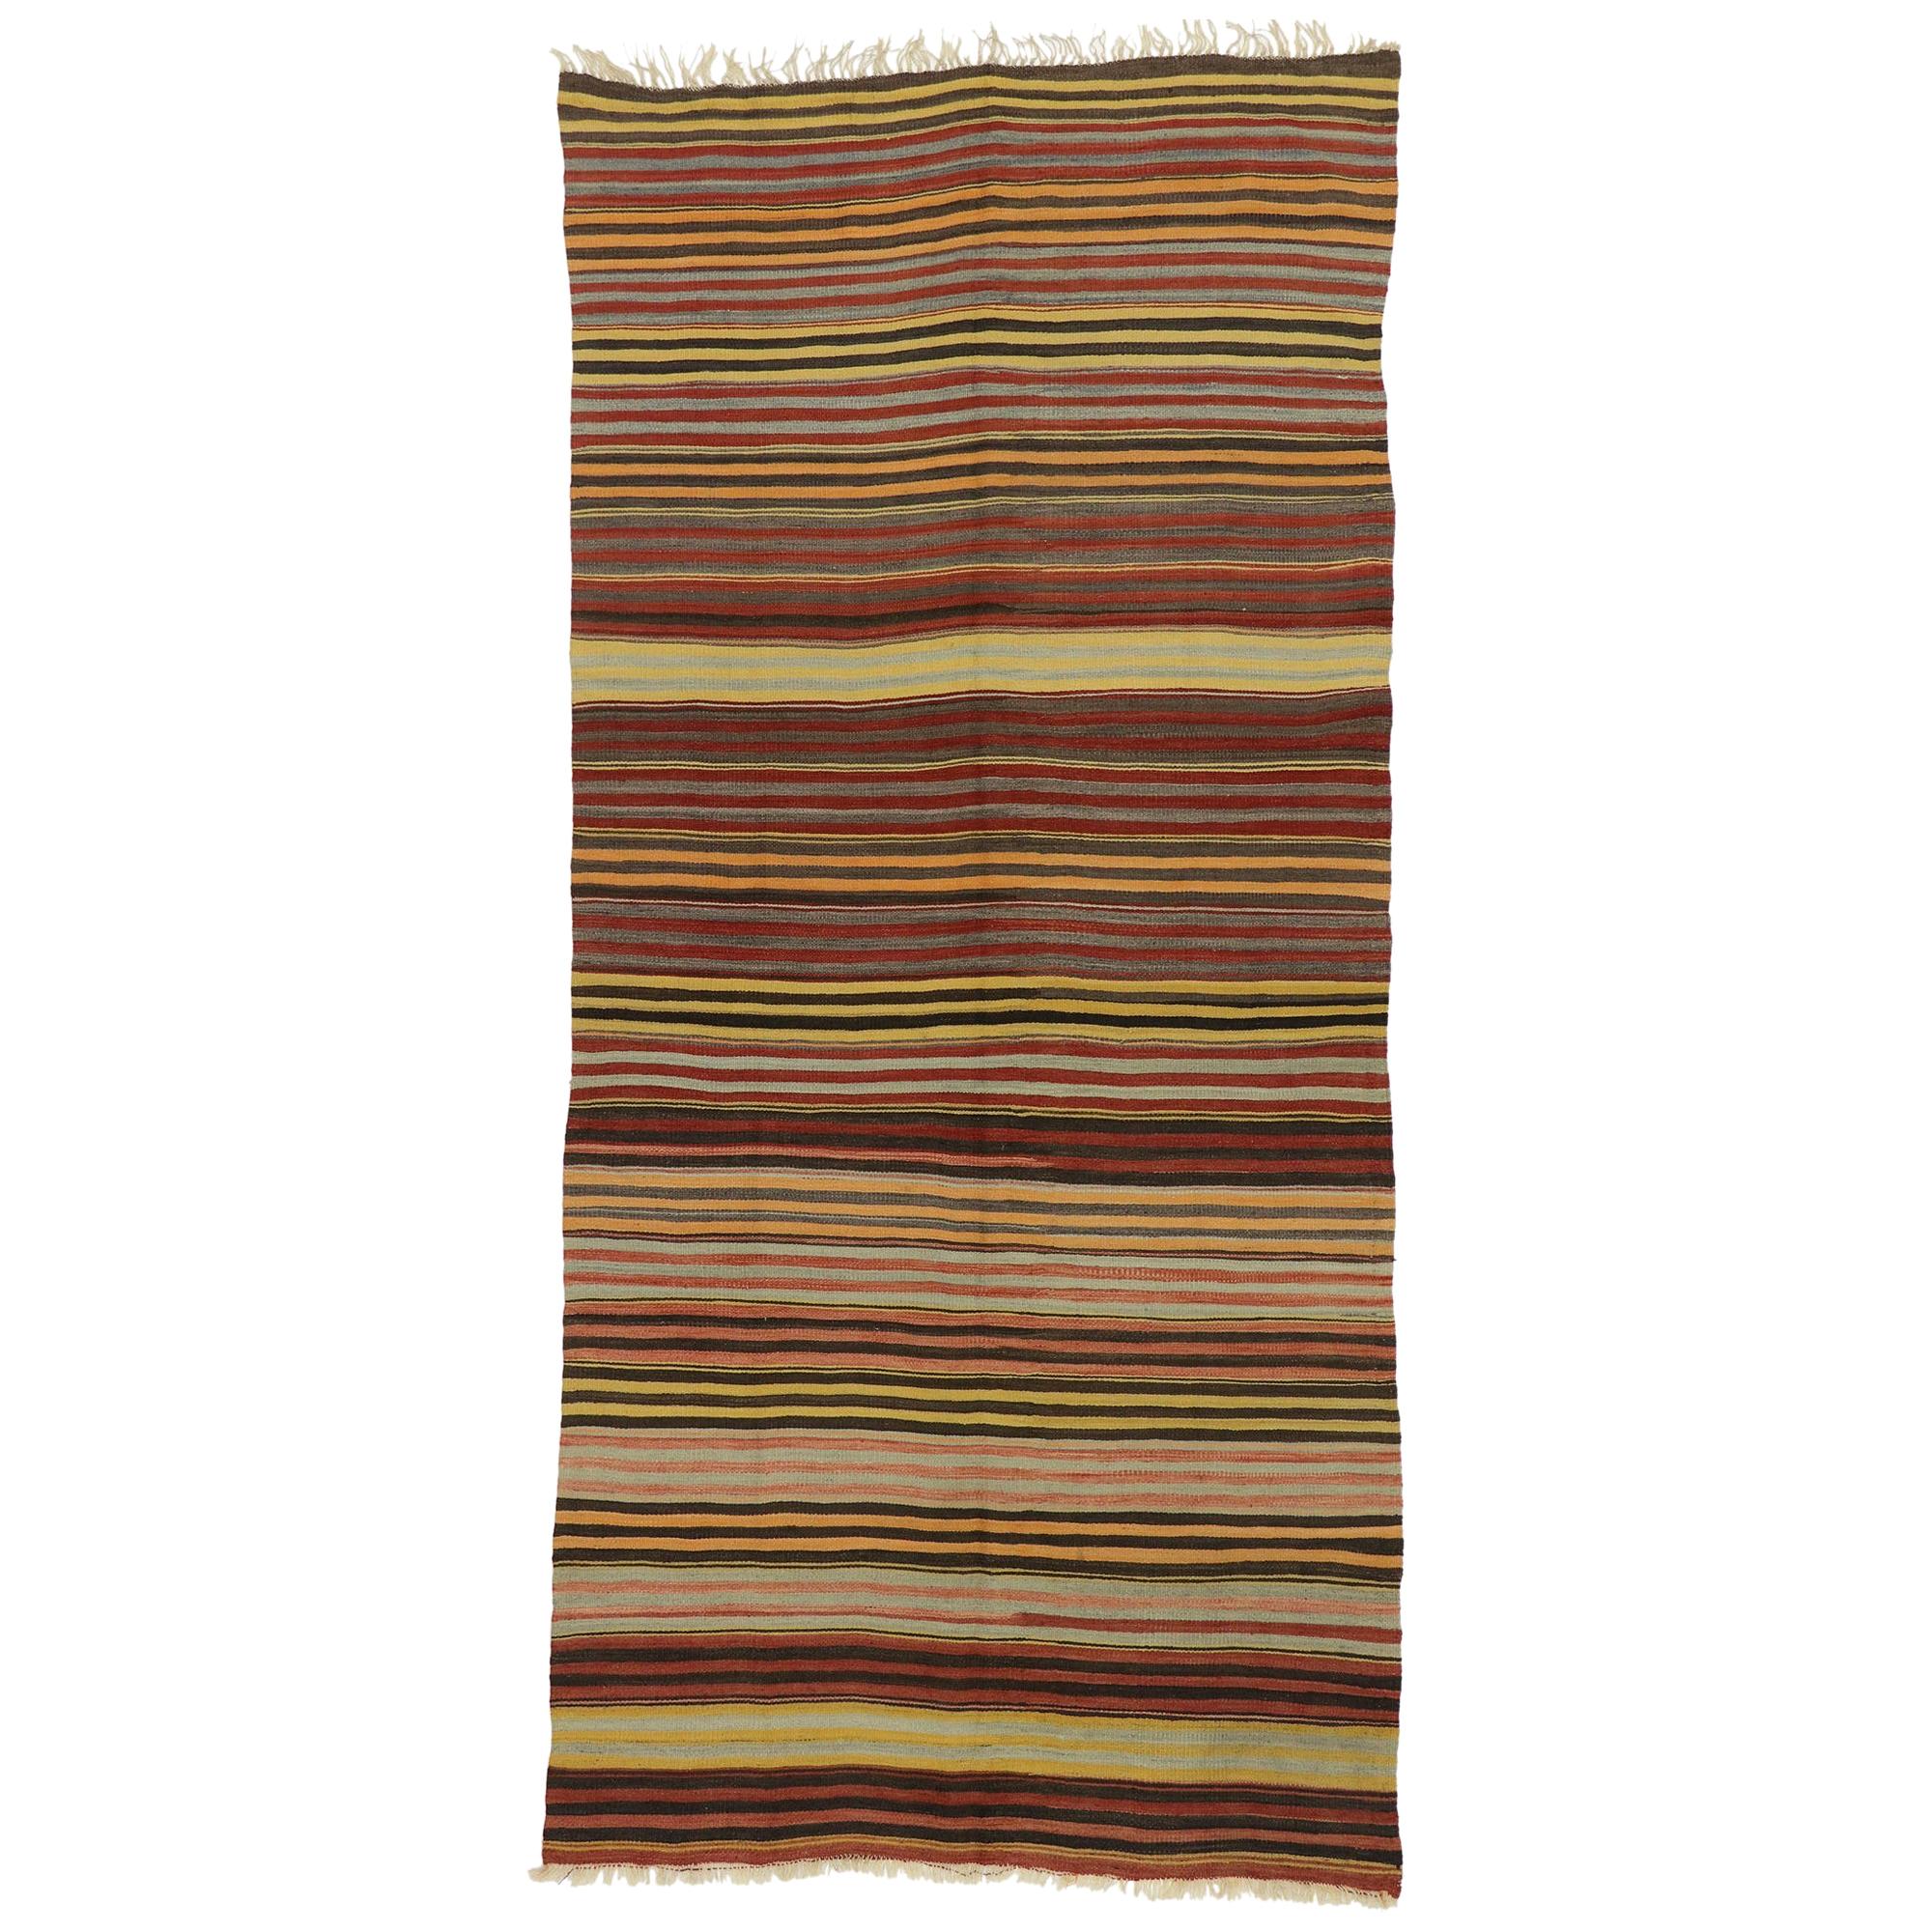 Vintage Turkish Striped Kilim Rug with Modern Rustic Cabin Style For Sale